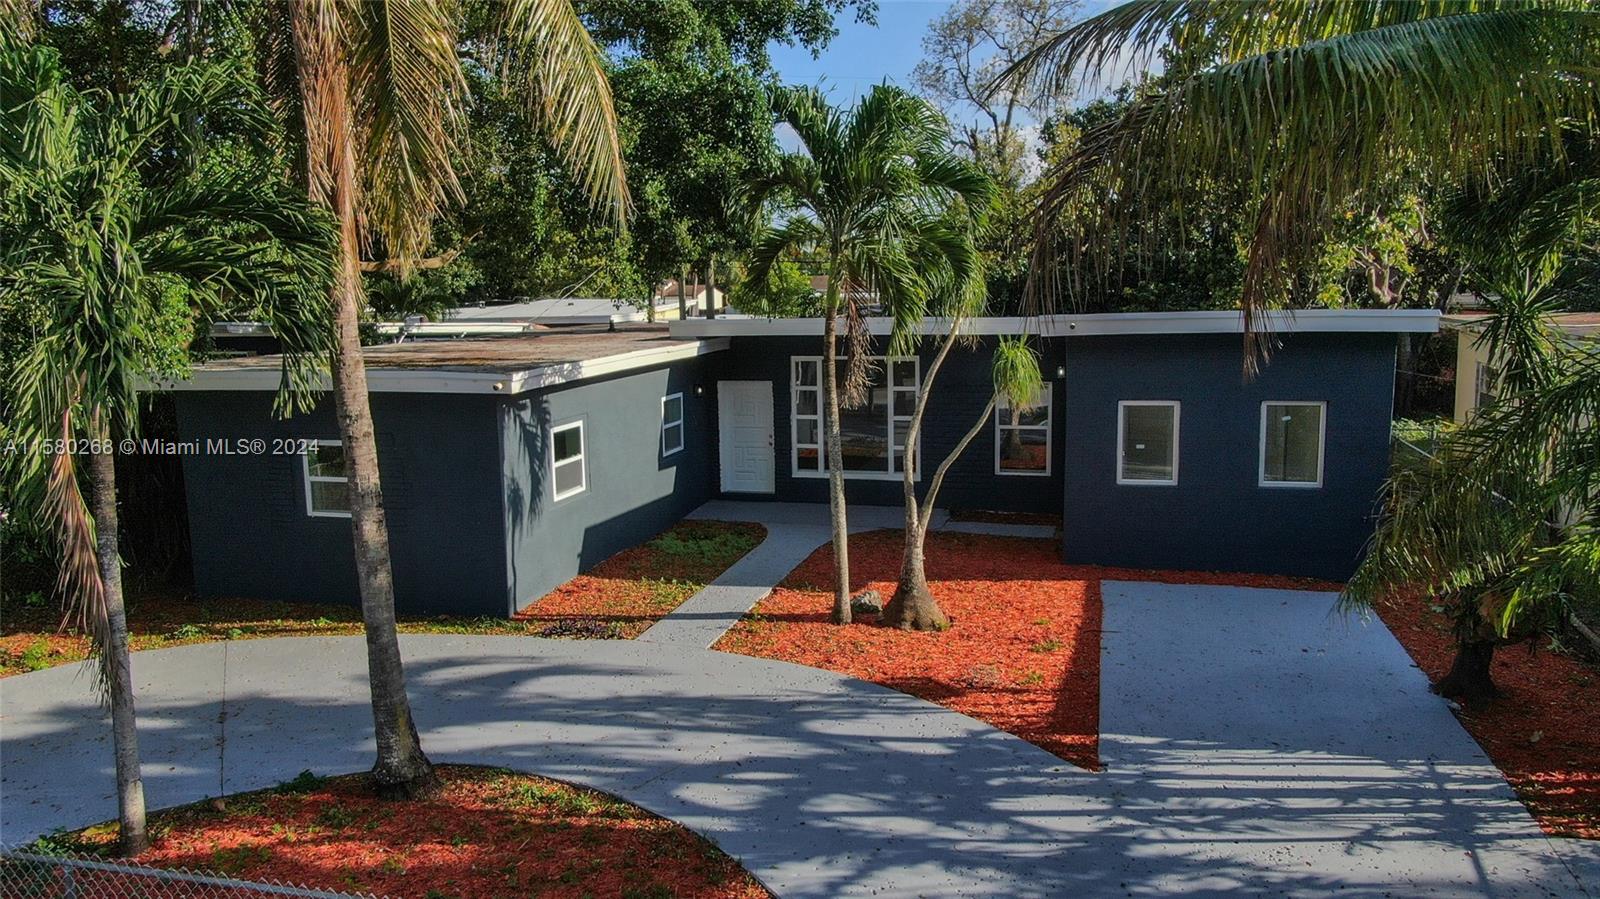 434 Nw 110th St St, Miami, Broward County, Florida - 4 Bedrooms  
2 Bathrooms - 